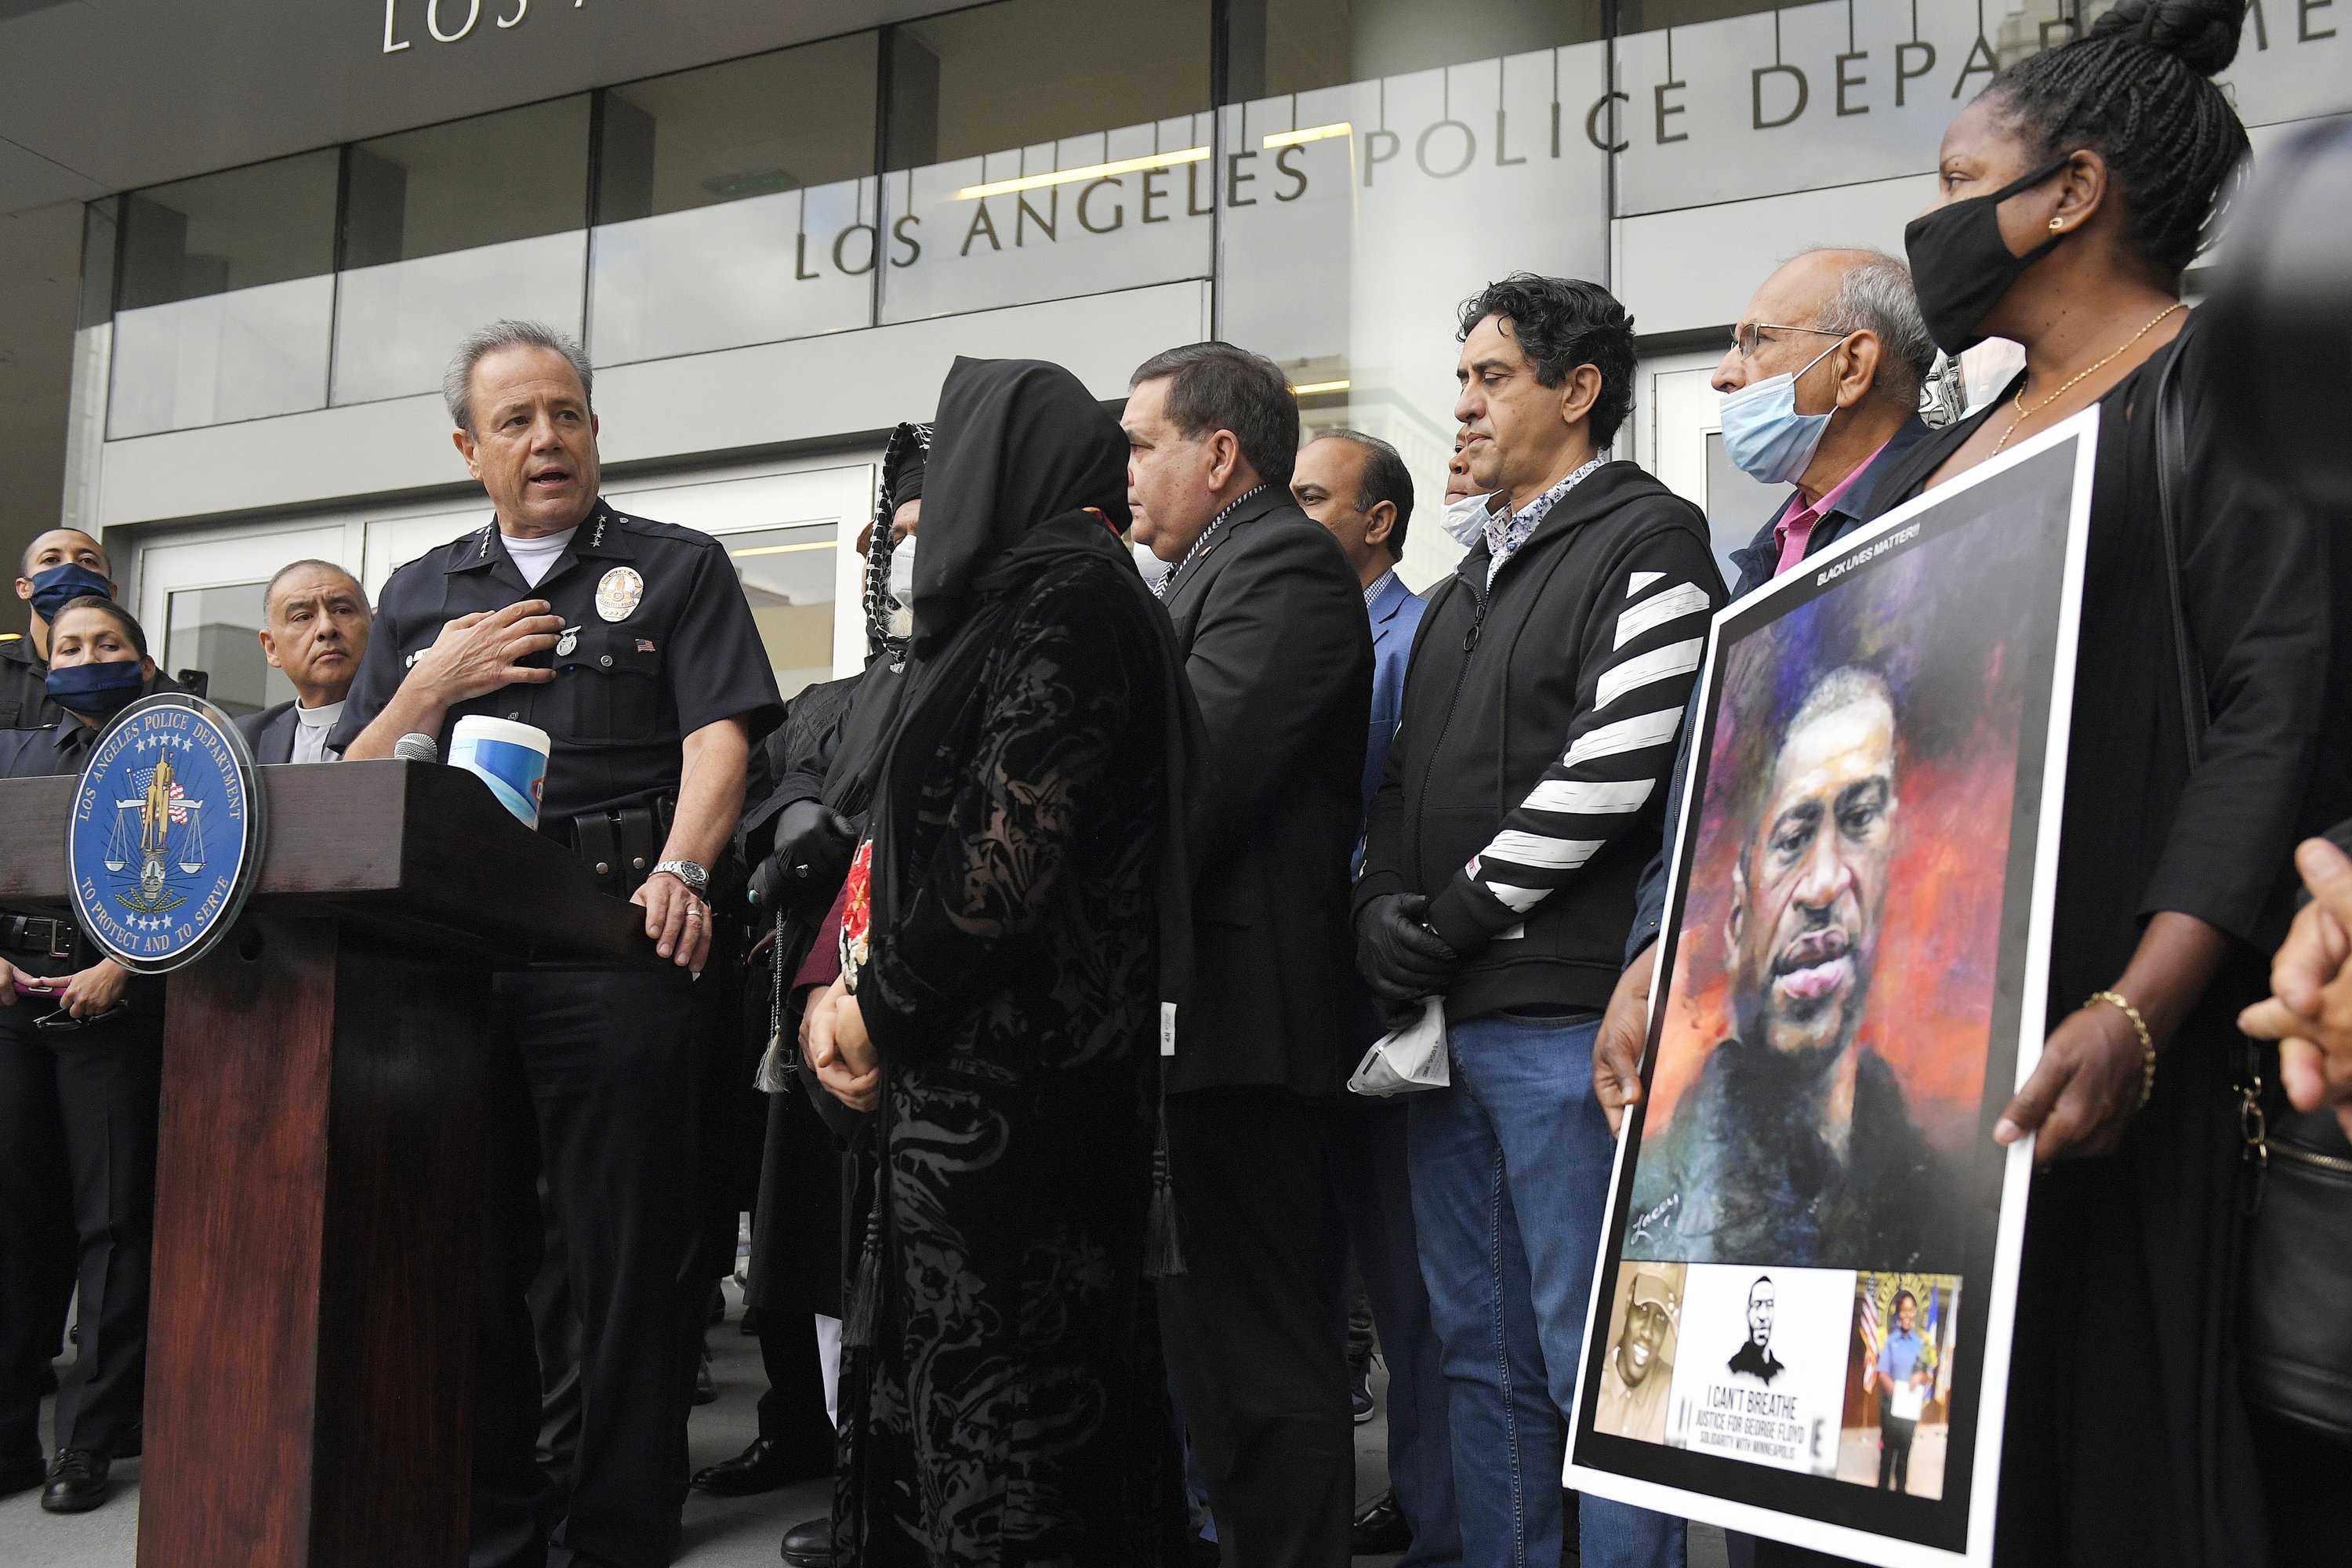 LAPD, police union furious over Floyd ‘Valentine’ report